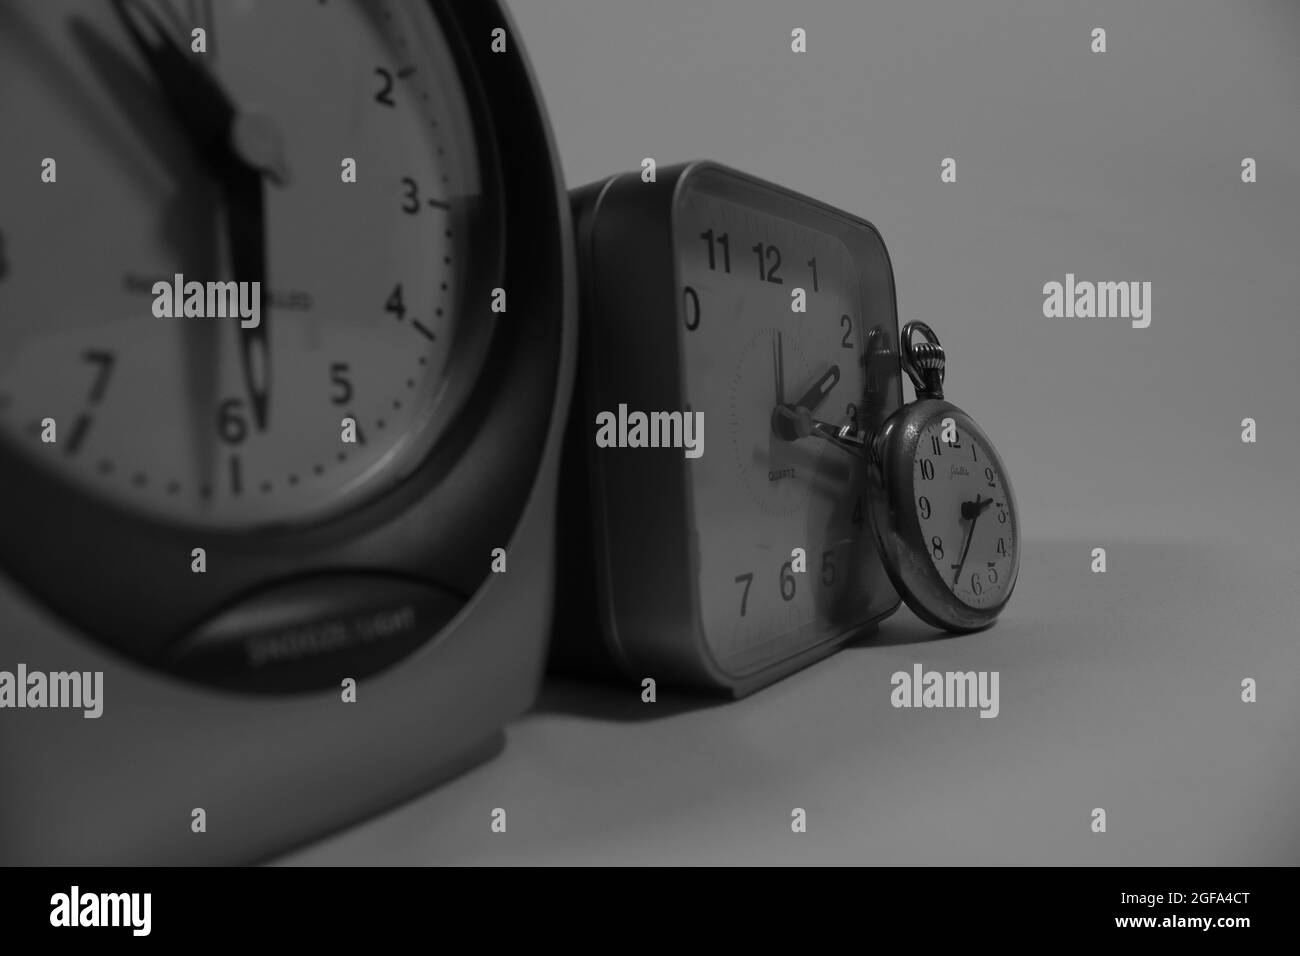 Analog clocks photographed in black and white Stock Photo